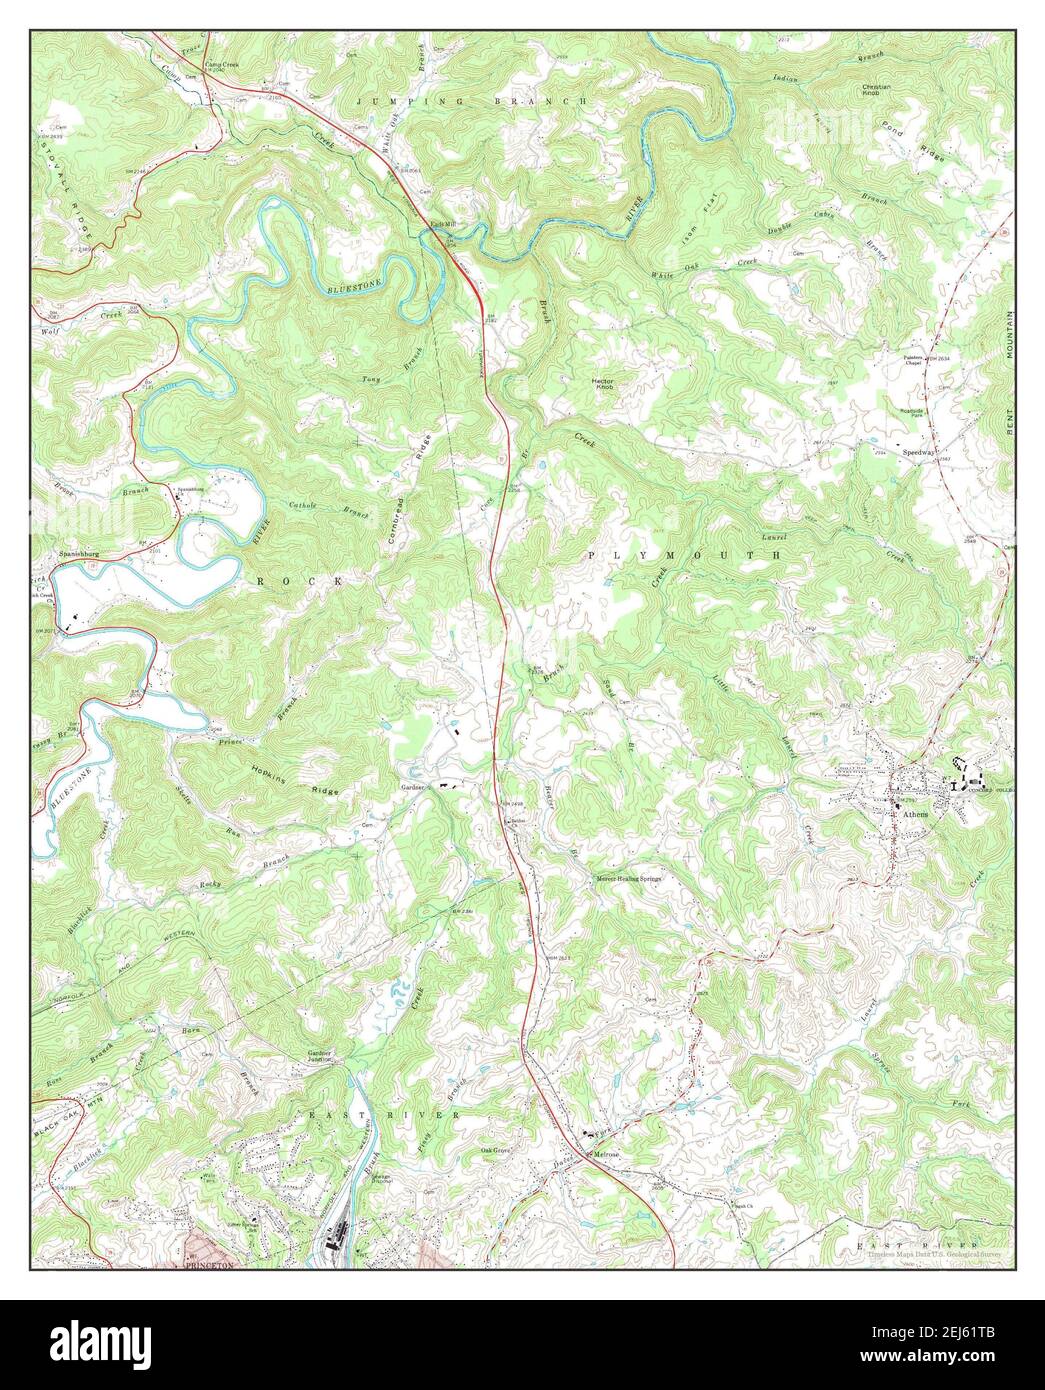 Athens, West Virginia, map 1968, 1:24000, United States of America by Timeless Maps, data U.S. Geological Survey Stock Photo